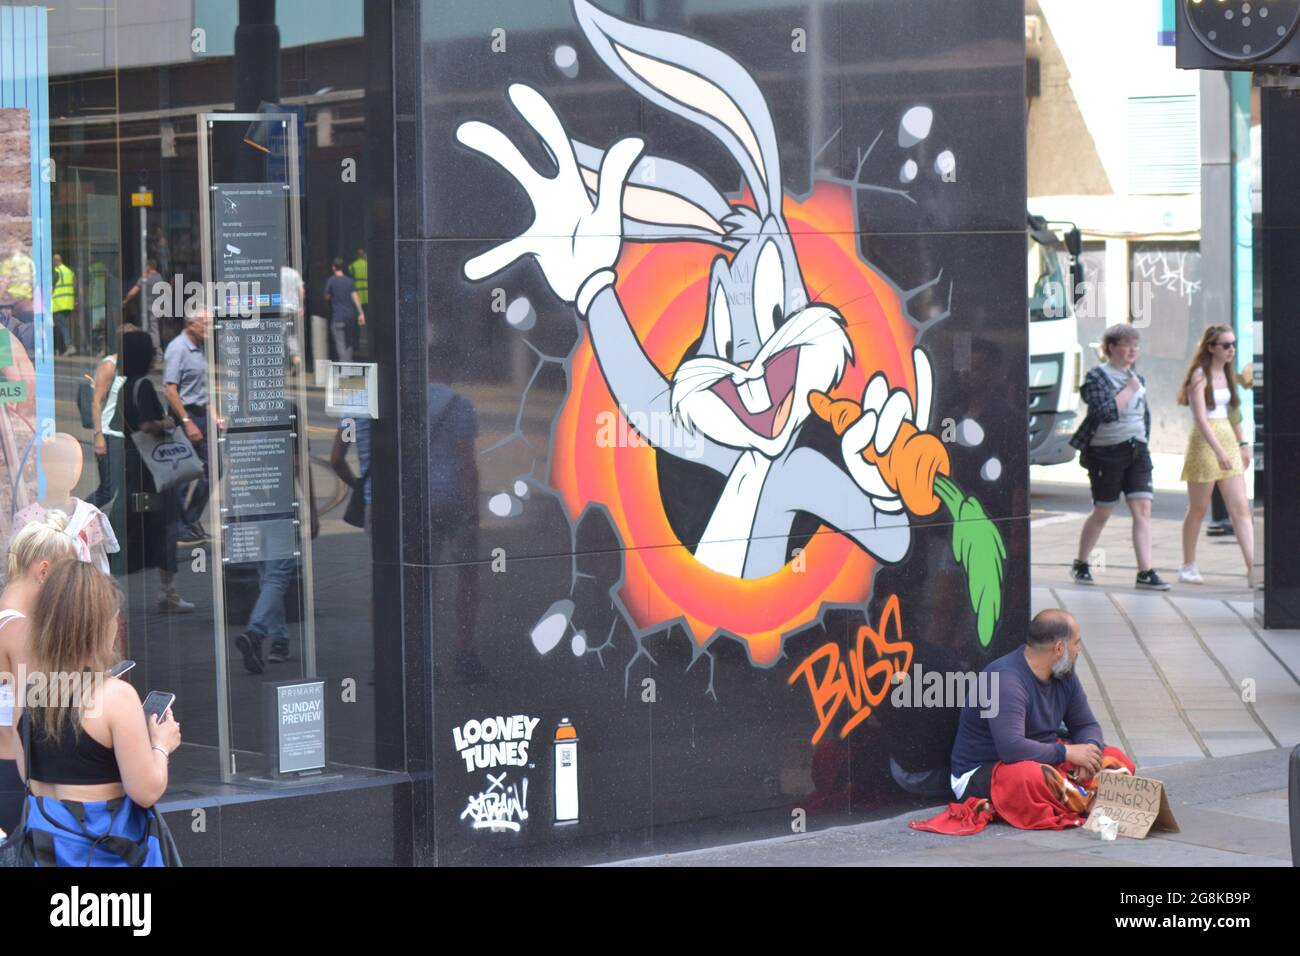 Manchester, UK. 21st July, 2021. UK Weather: Another glorious, sunny afternoon in Manchester, England, UK, as the heatwave continues. A man with a card sign saying he is 'very hungry god bless' sits by a cartoon figure on the wall, while people pass by. The cartoon figure is a Bugs Bunny image, part of a Looney Tunes art trail, in the city centre. Credit: Terry Waller/Alamy Live News Stock Photo